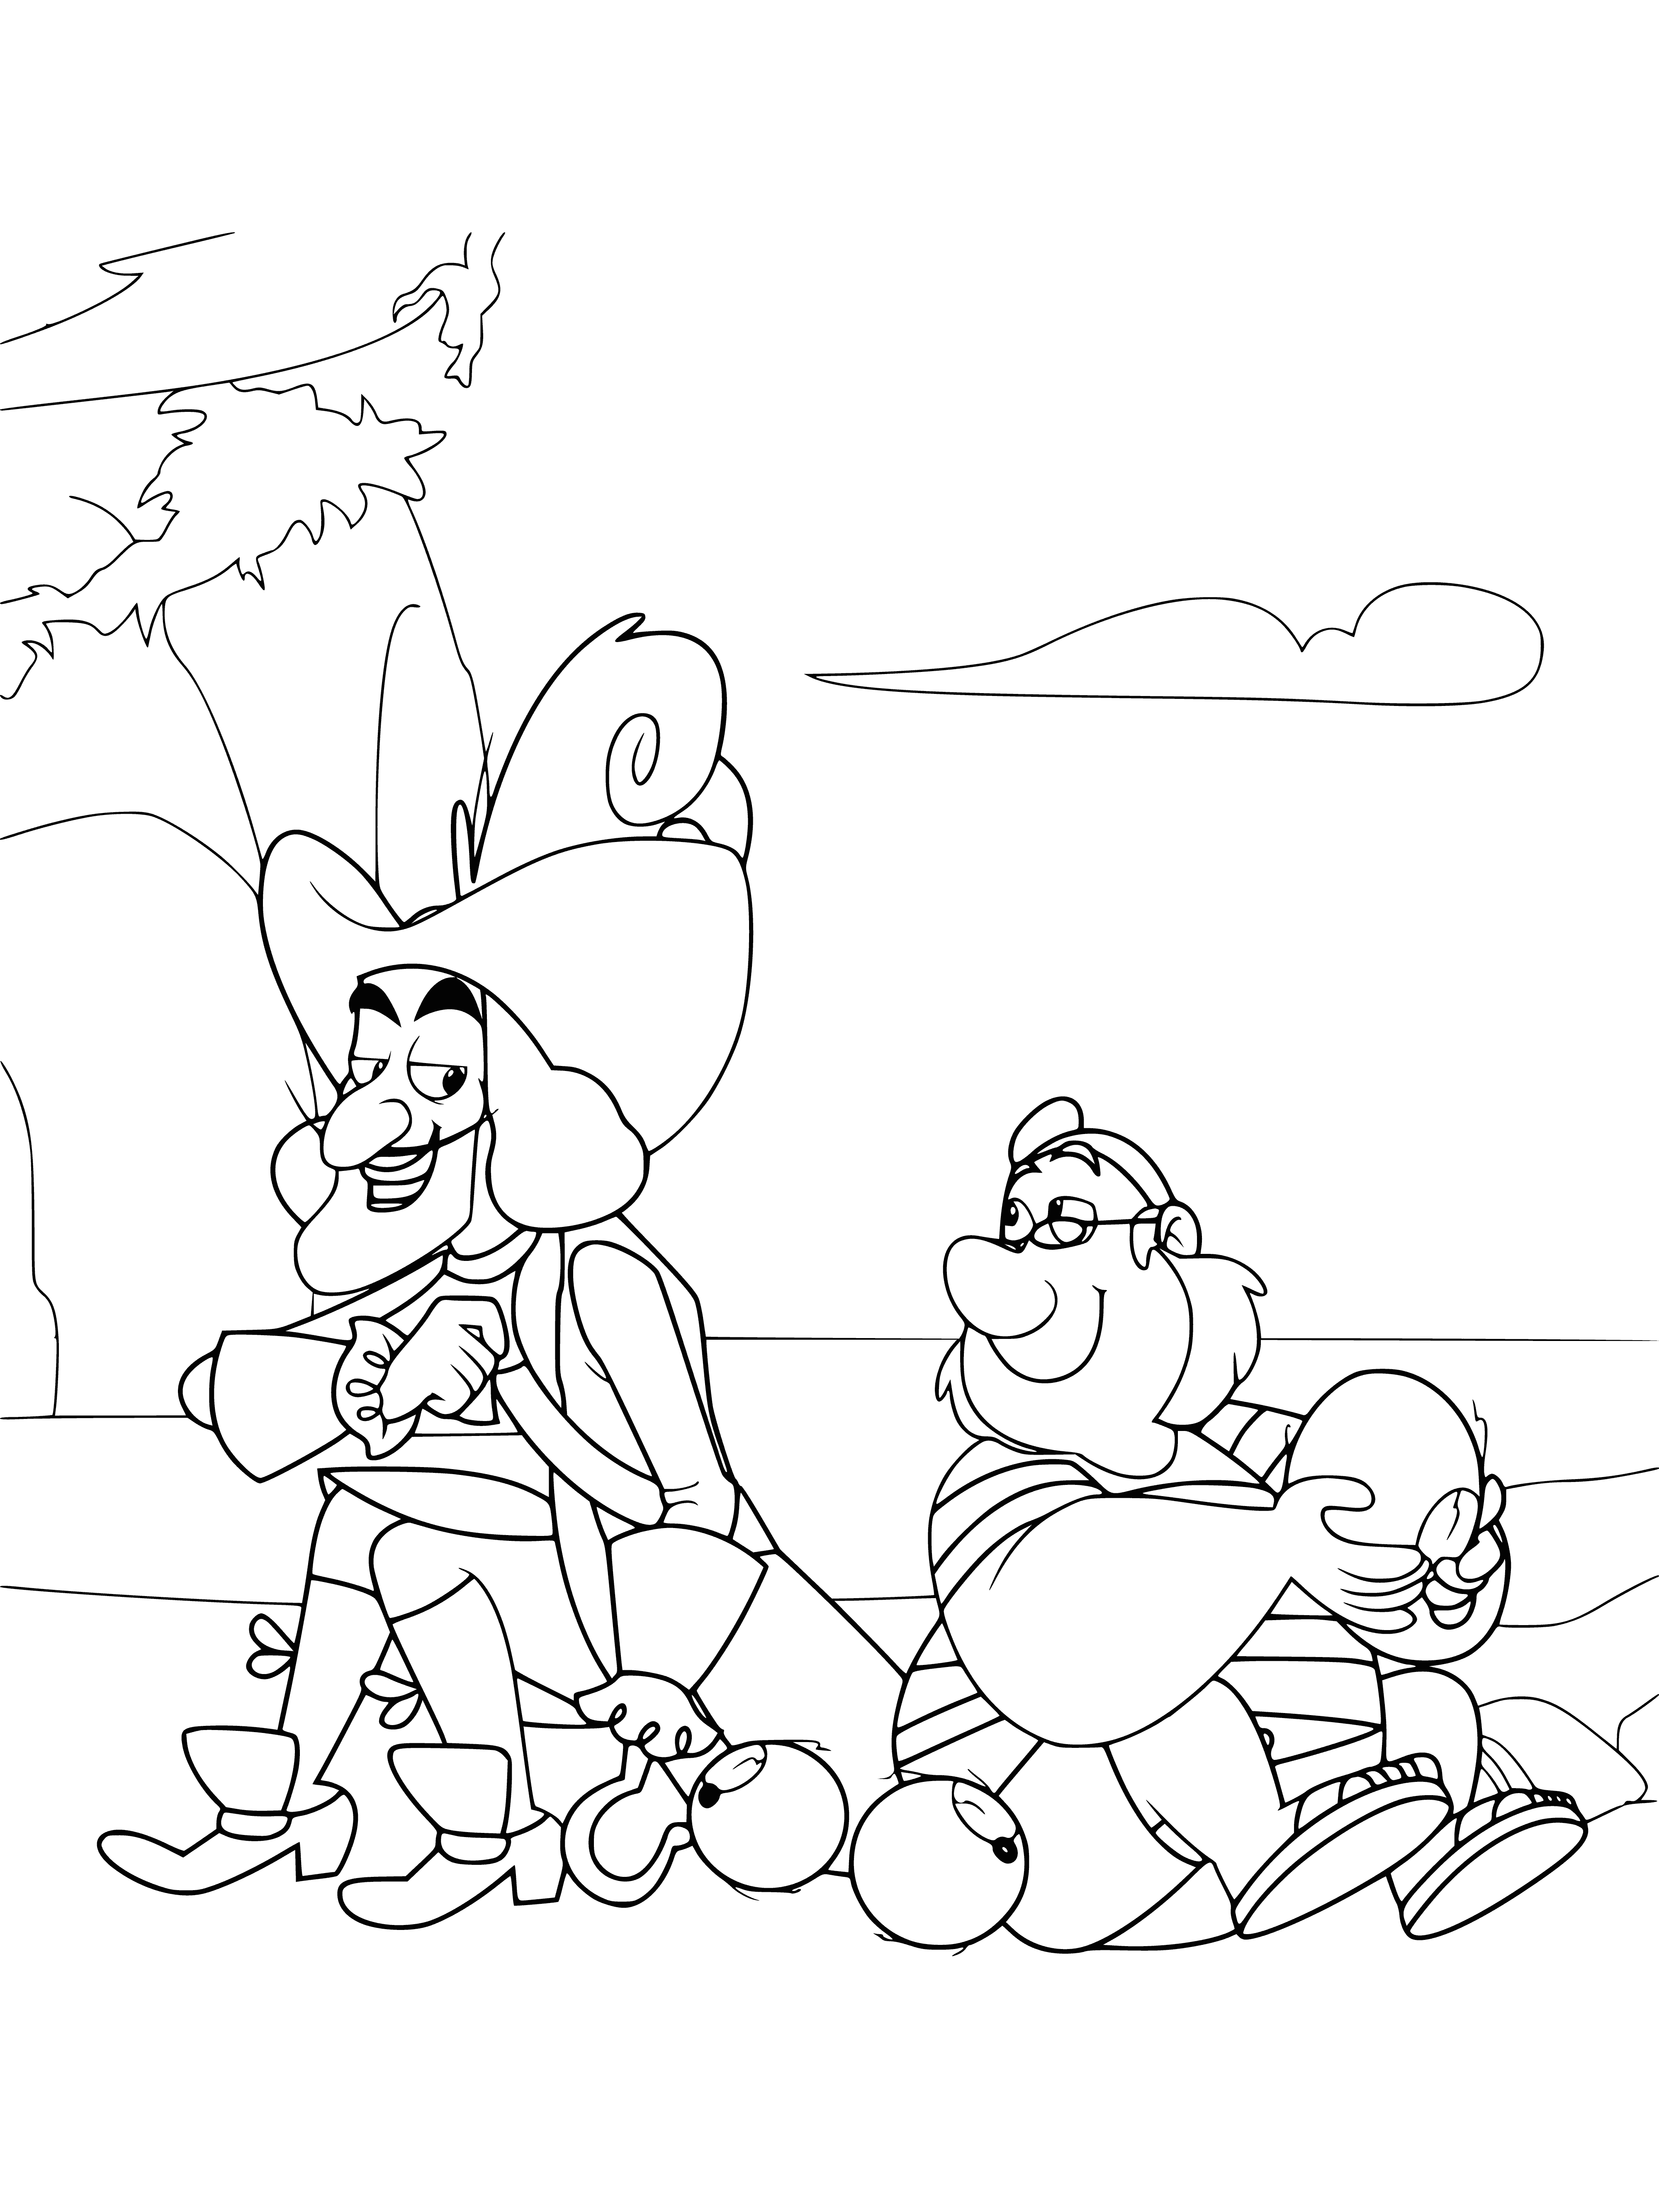 coloring page: Jake and the Pirates are on the hunt for Hook & Smee, trying to stop them before more mischief happens. #disneycharacter